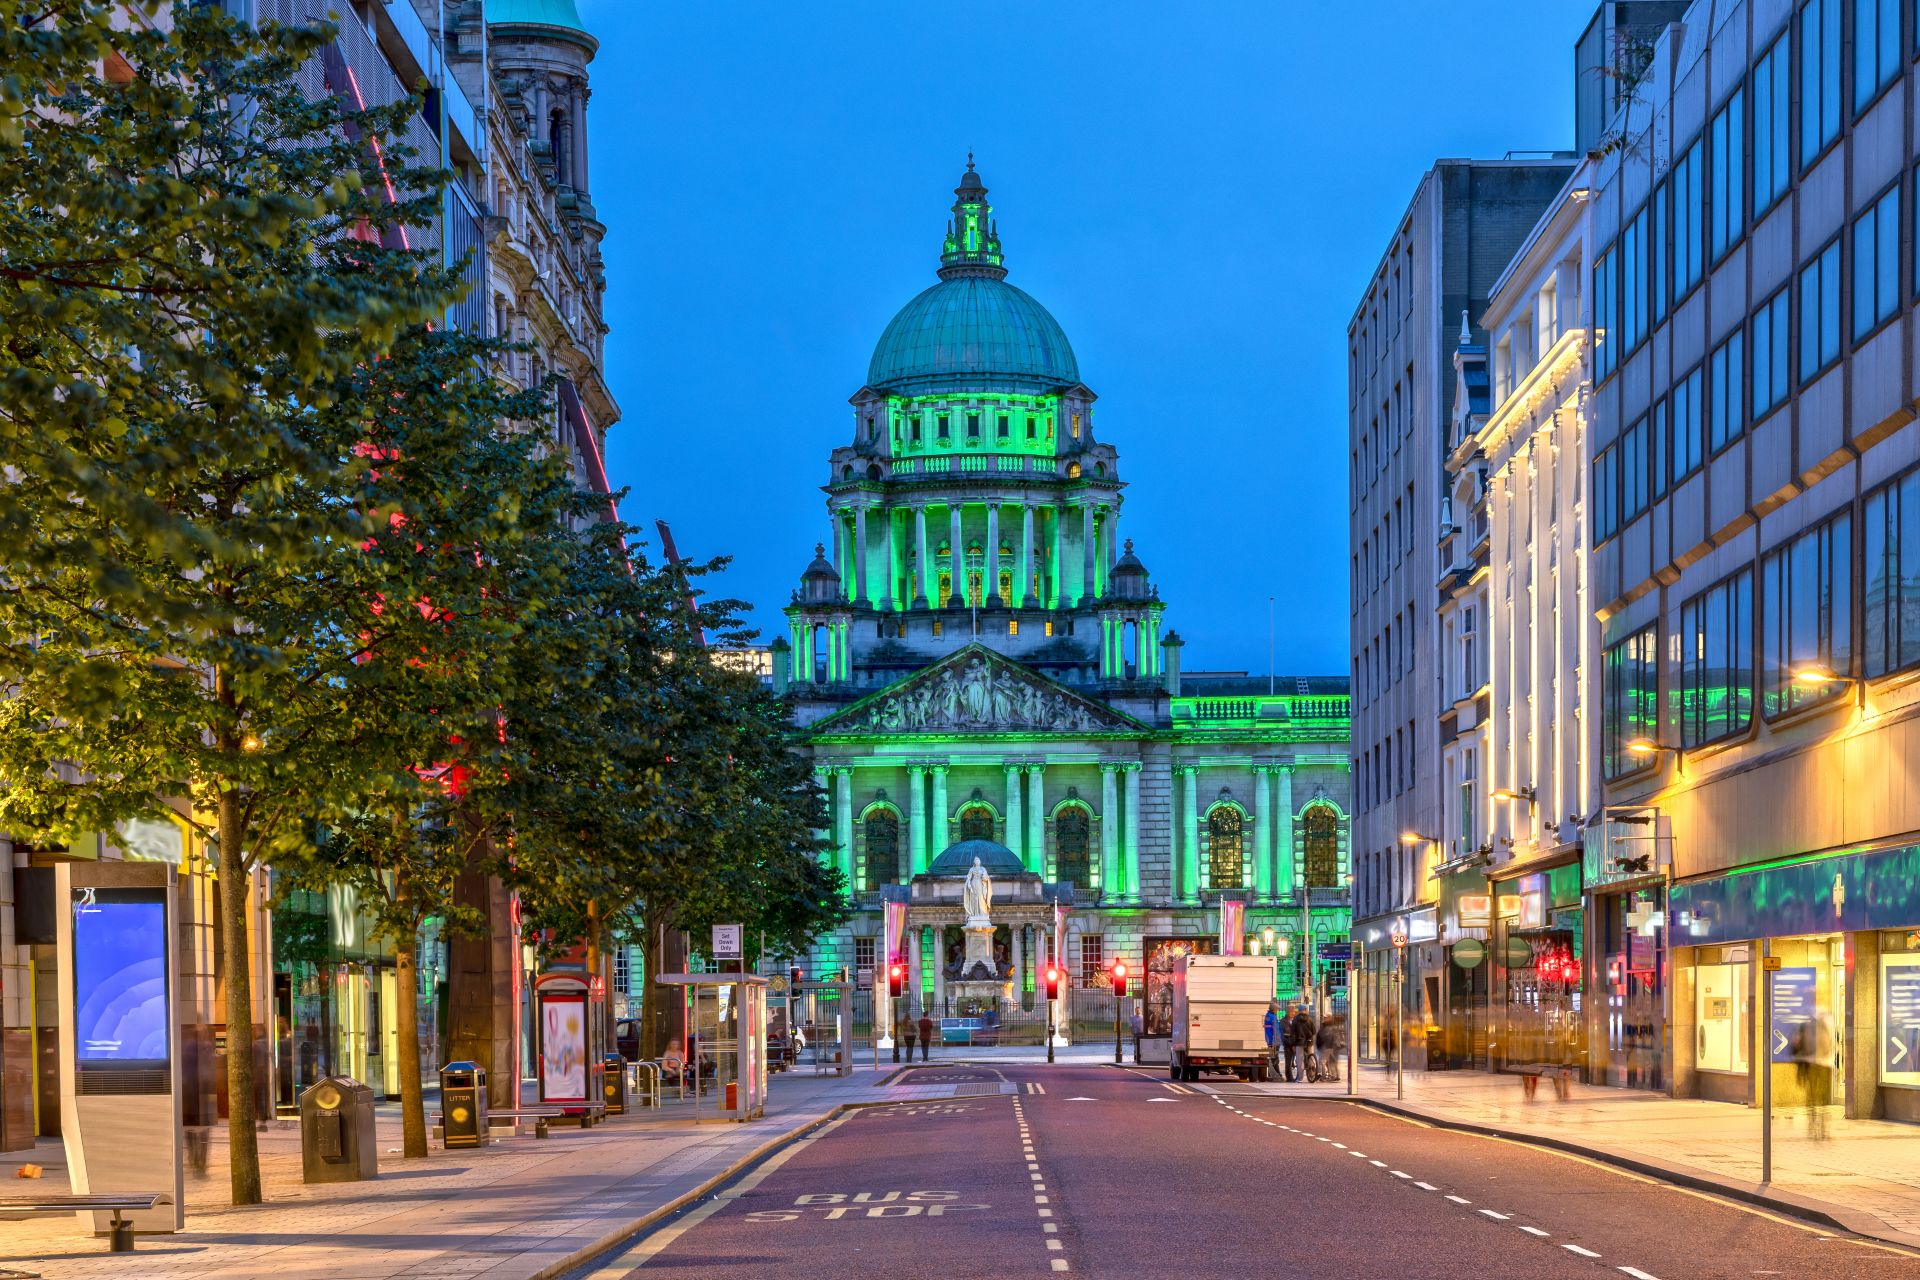 Belfast City Hall in Donegall Square